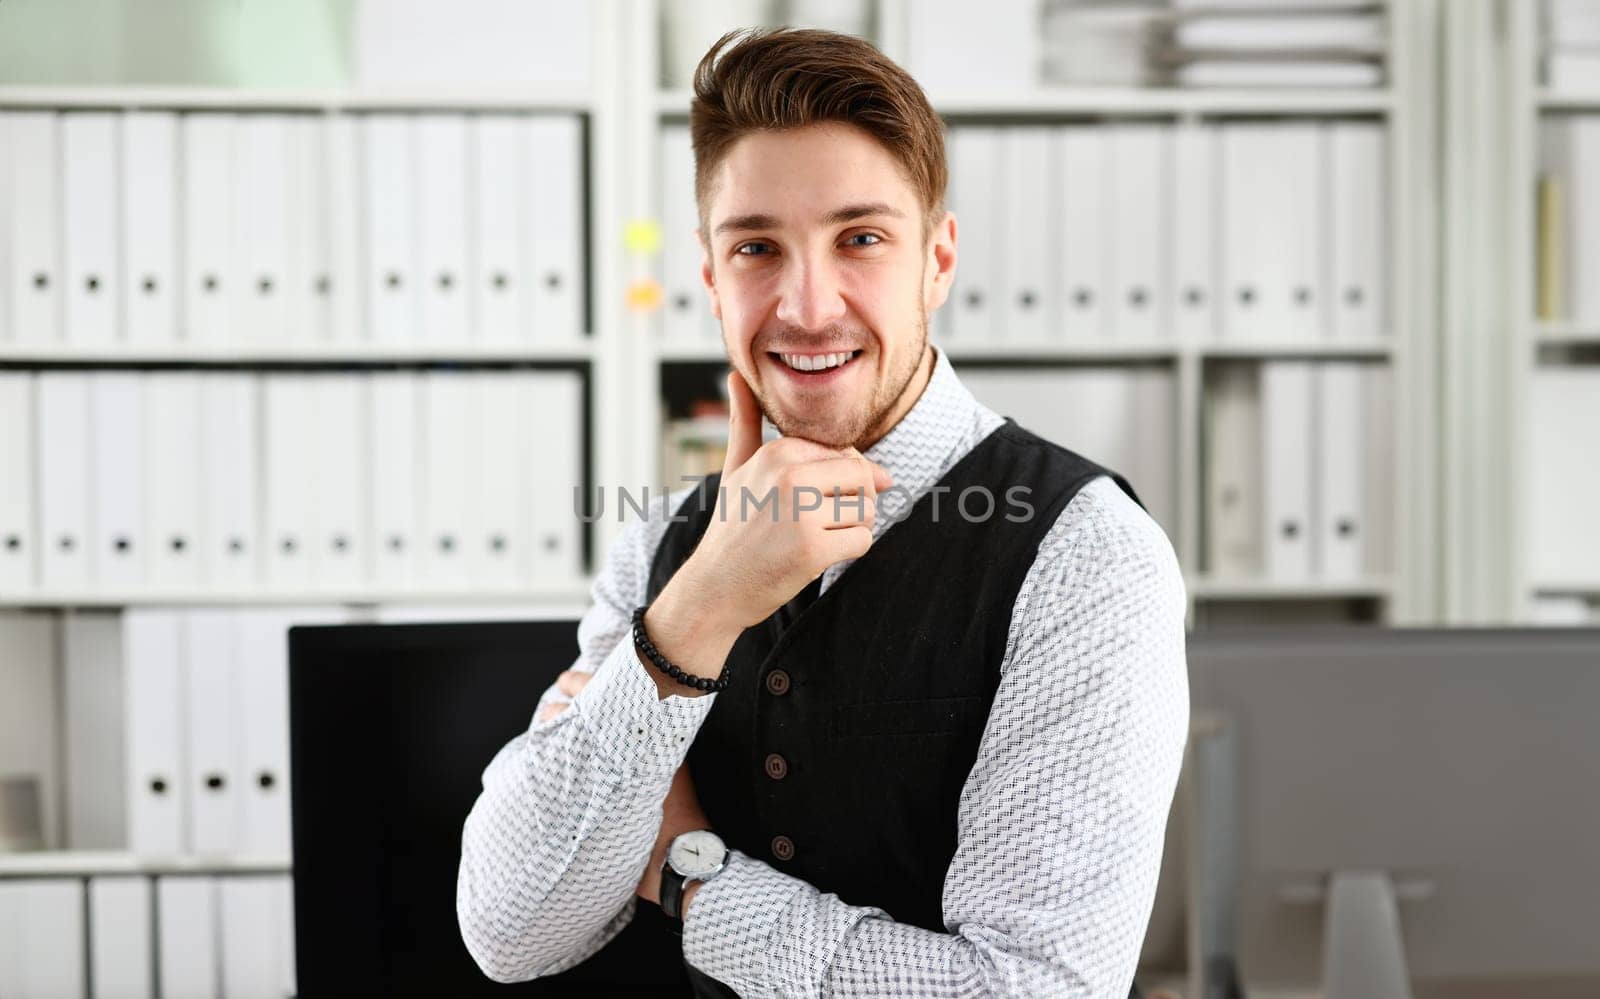 Handsome man in suit and tie stand in office looking in camera hands crossed on chest. White collar dress code modern office lifestyle graduate college study profession idea coach train concept